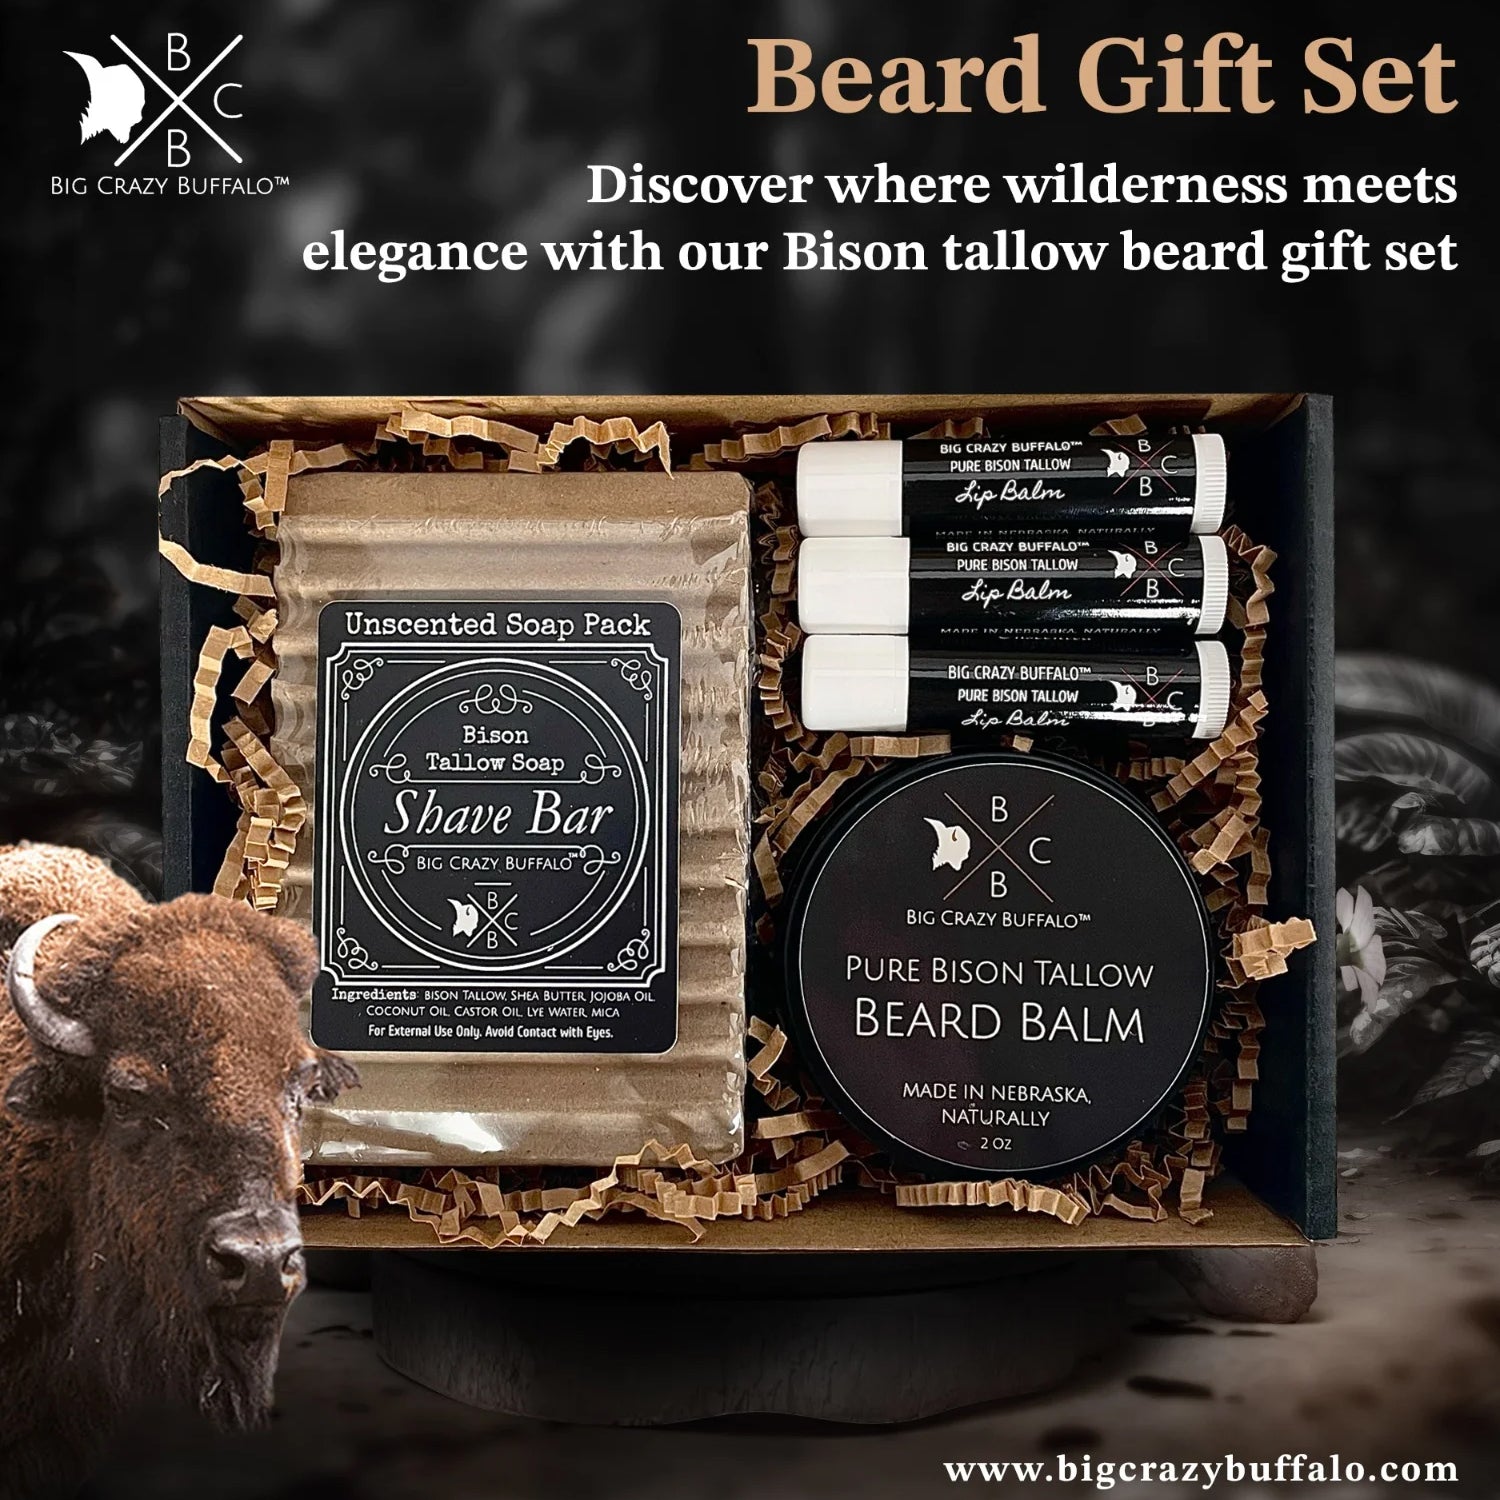 Bison tallow gift sets